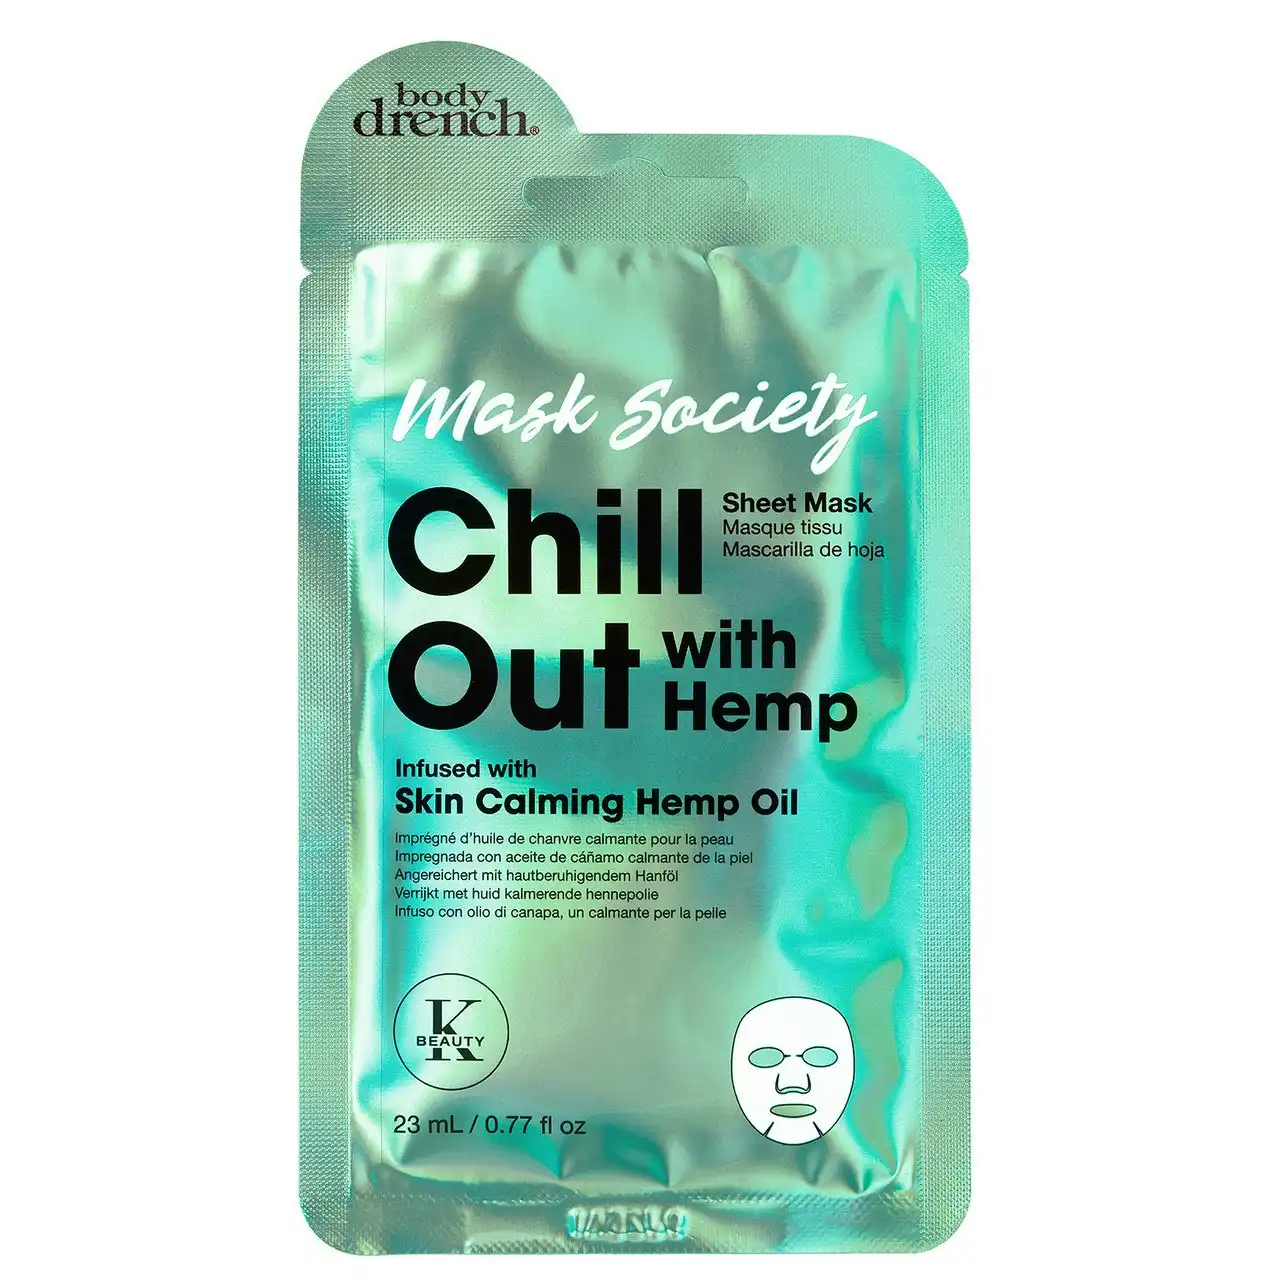 Mask Society Chill Out With Hemp Sheet Mask 23ml